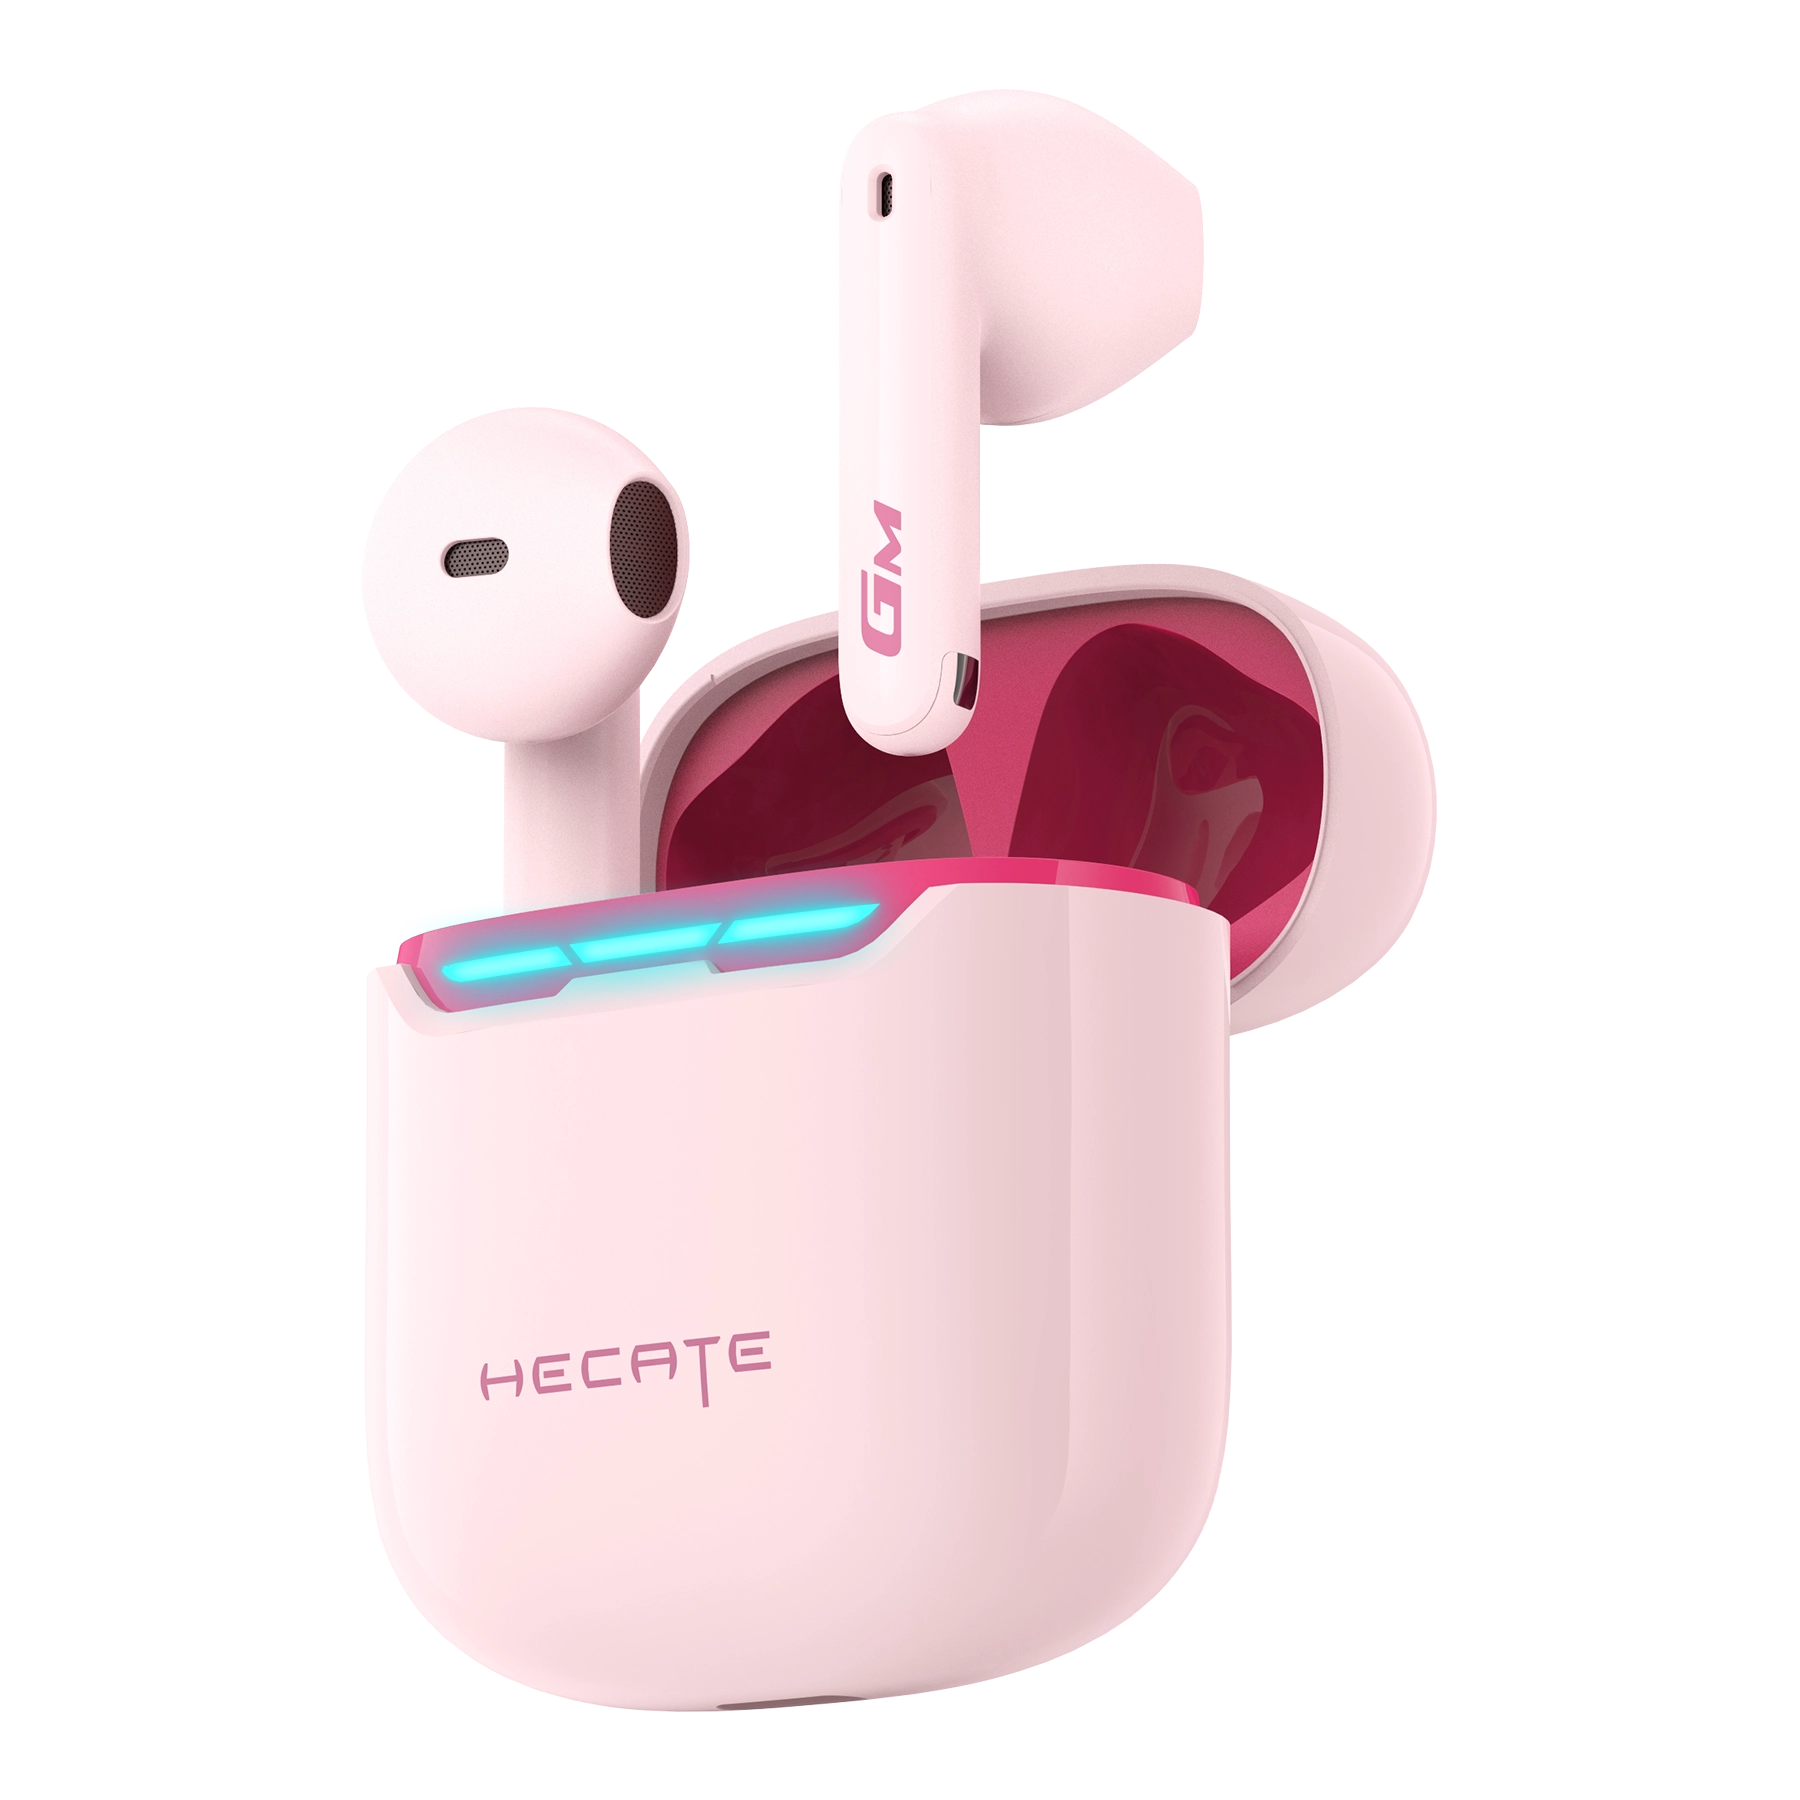 GM3 Plus Wireless Earbuds Product Pictures pink_5